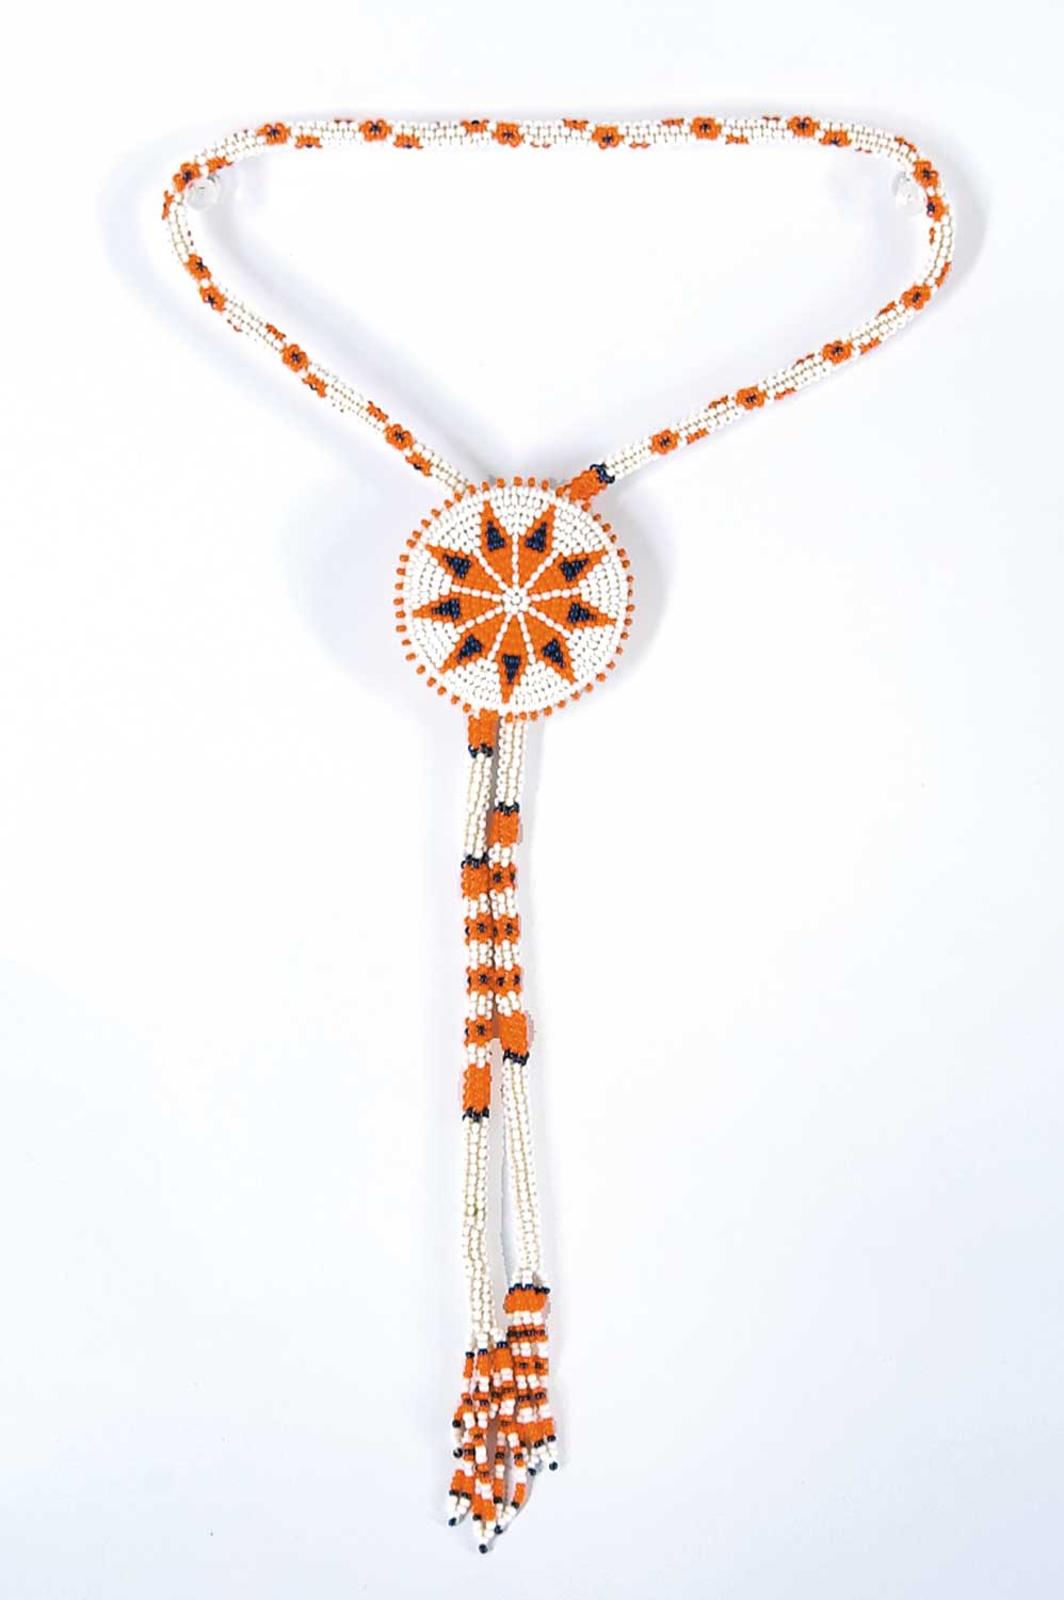 Robert Charles Aller (1922-2008) - Untitled - Orange, Blue and White Beaded Rope Bolo Necklace